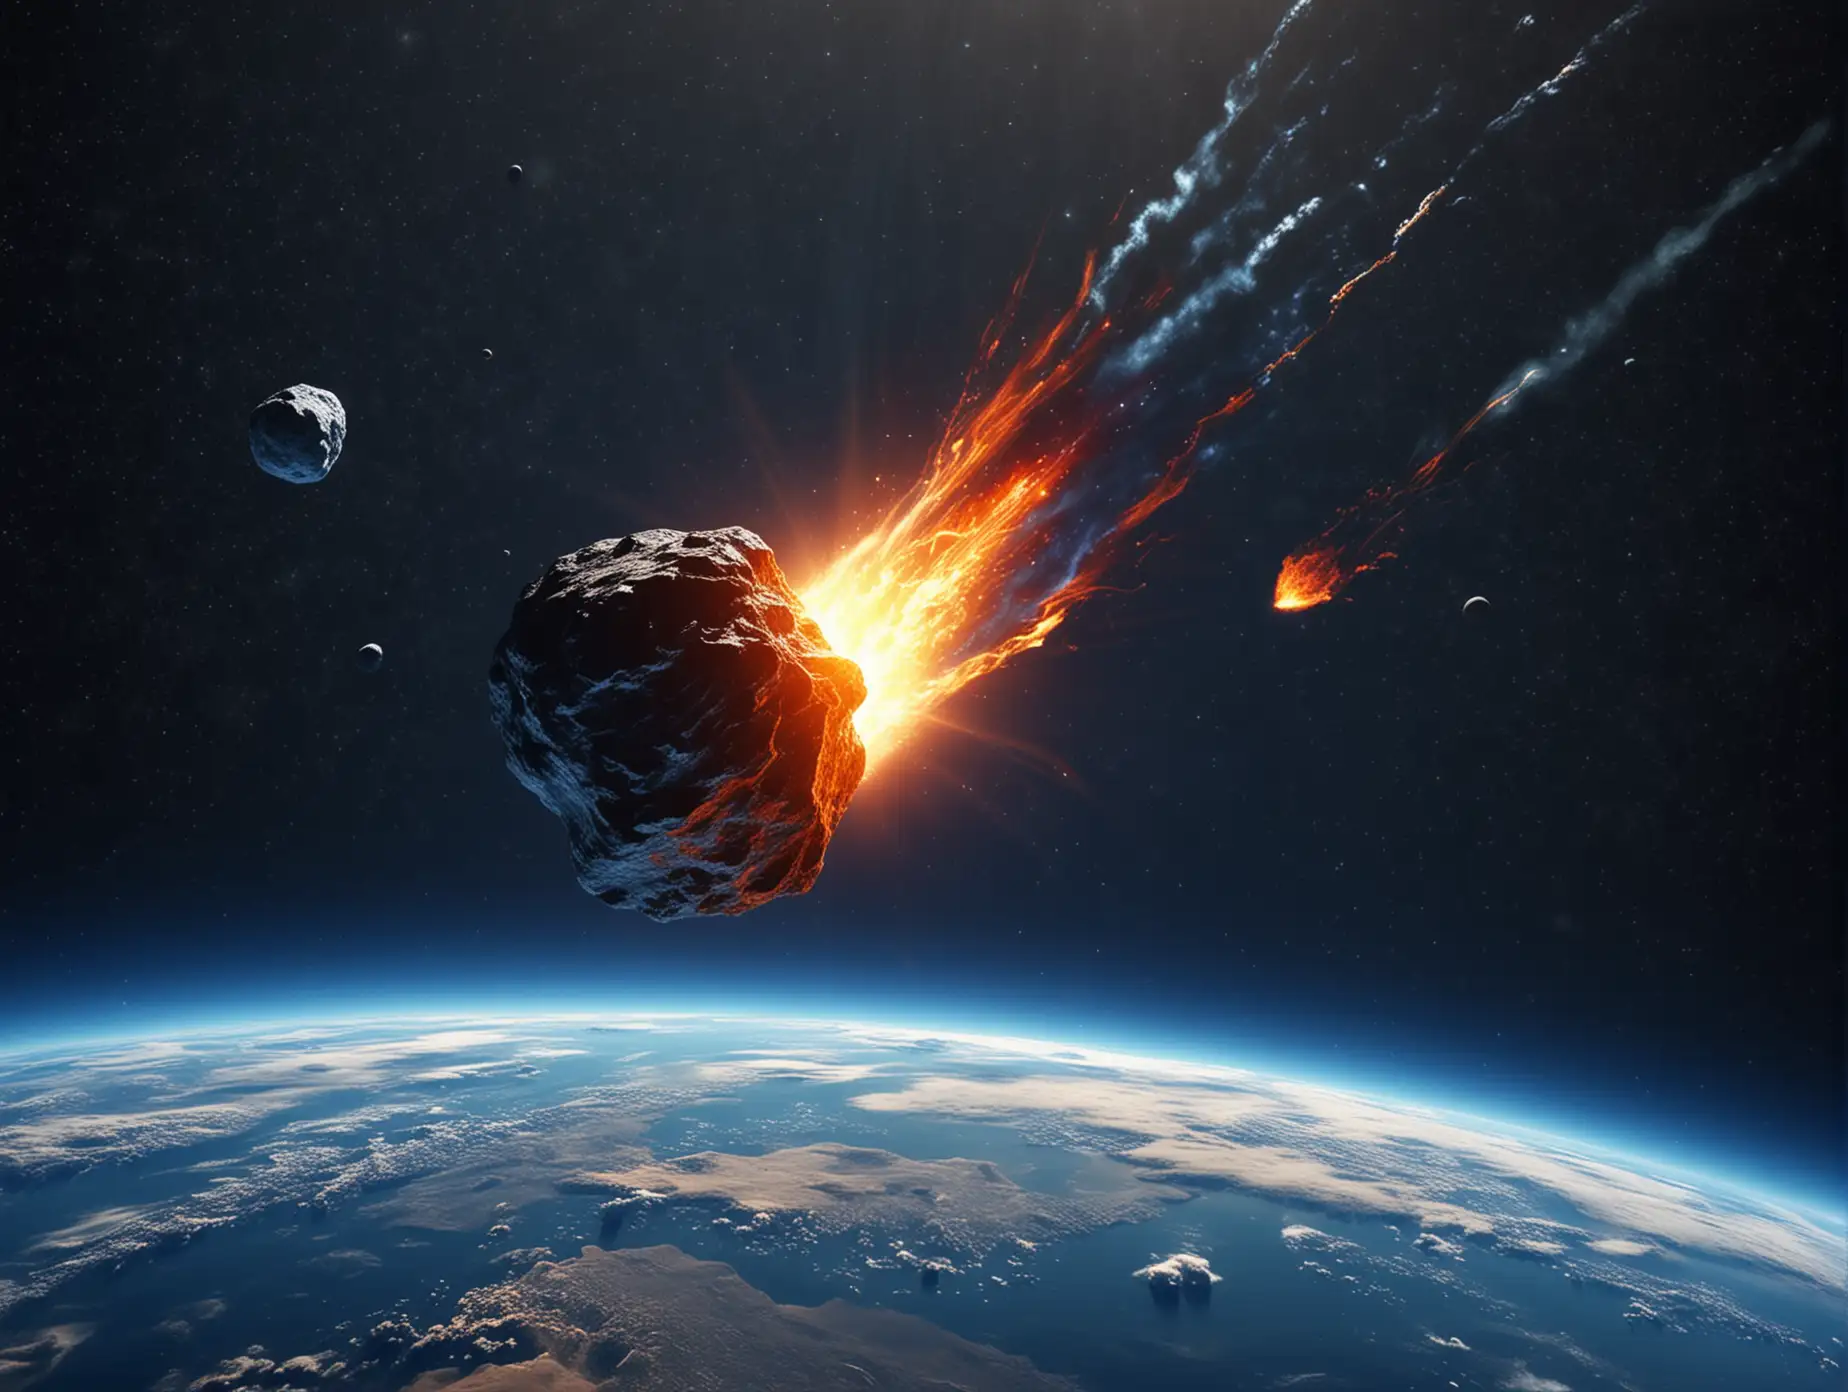 Approaching Asteroid Threatens Earth Dramatic Space Scene with Fiery Meteor